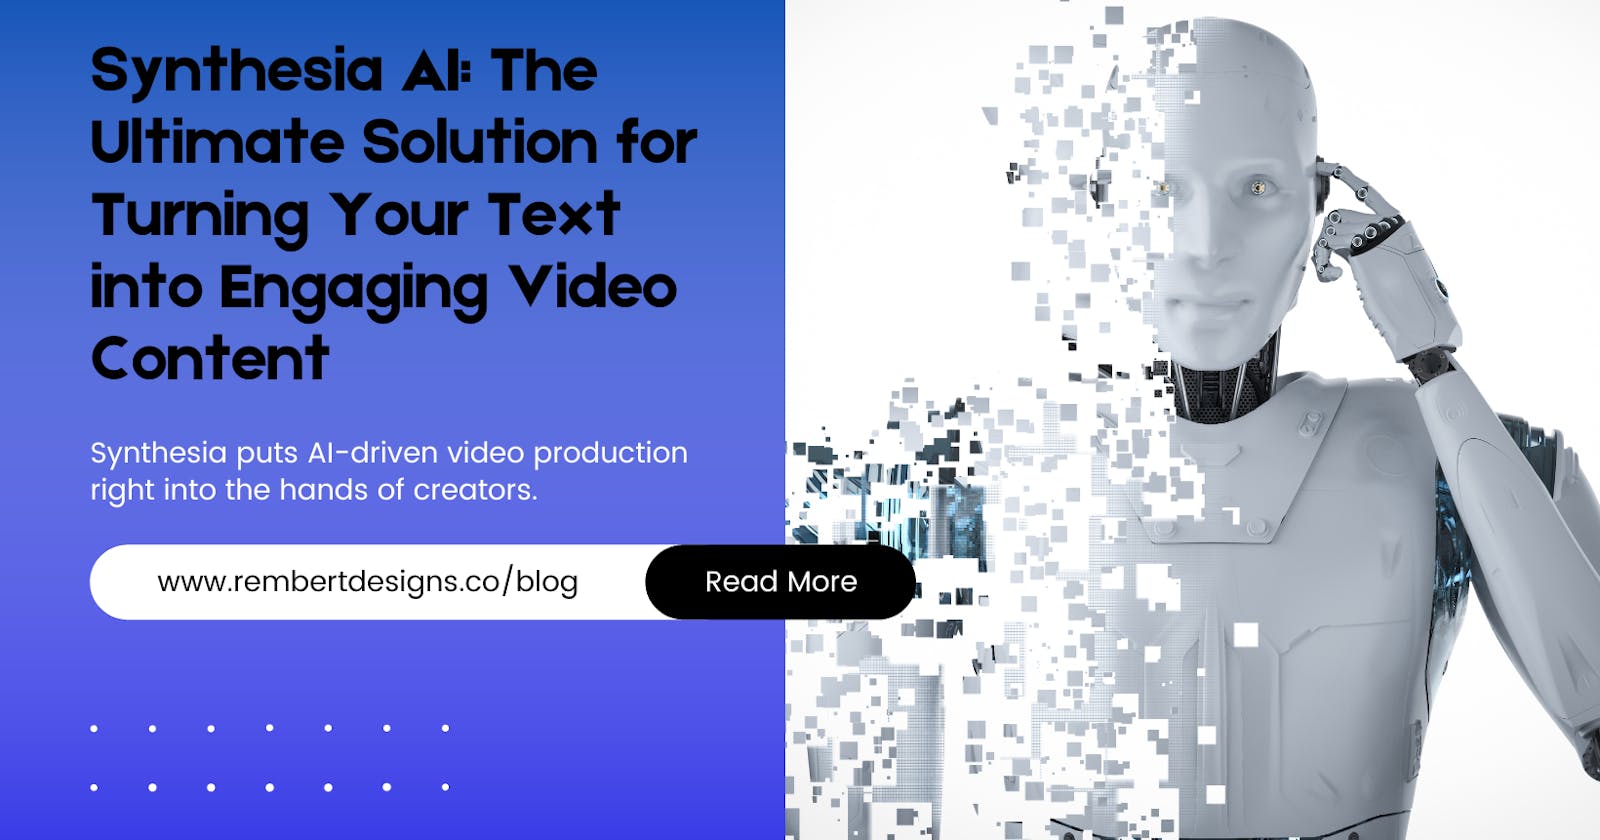 Synthesia AI: The Ultimate Solution for Turning Your Text into Engaging Video Content